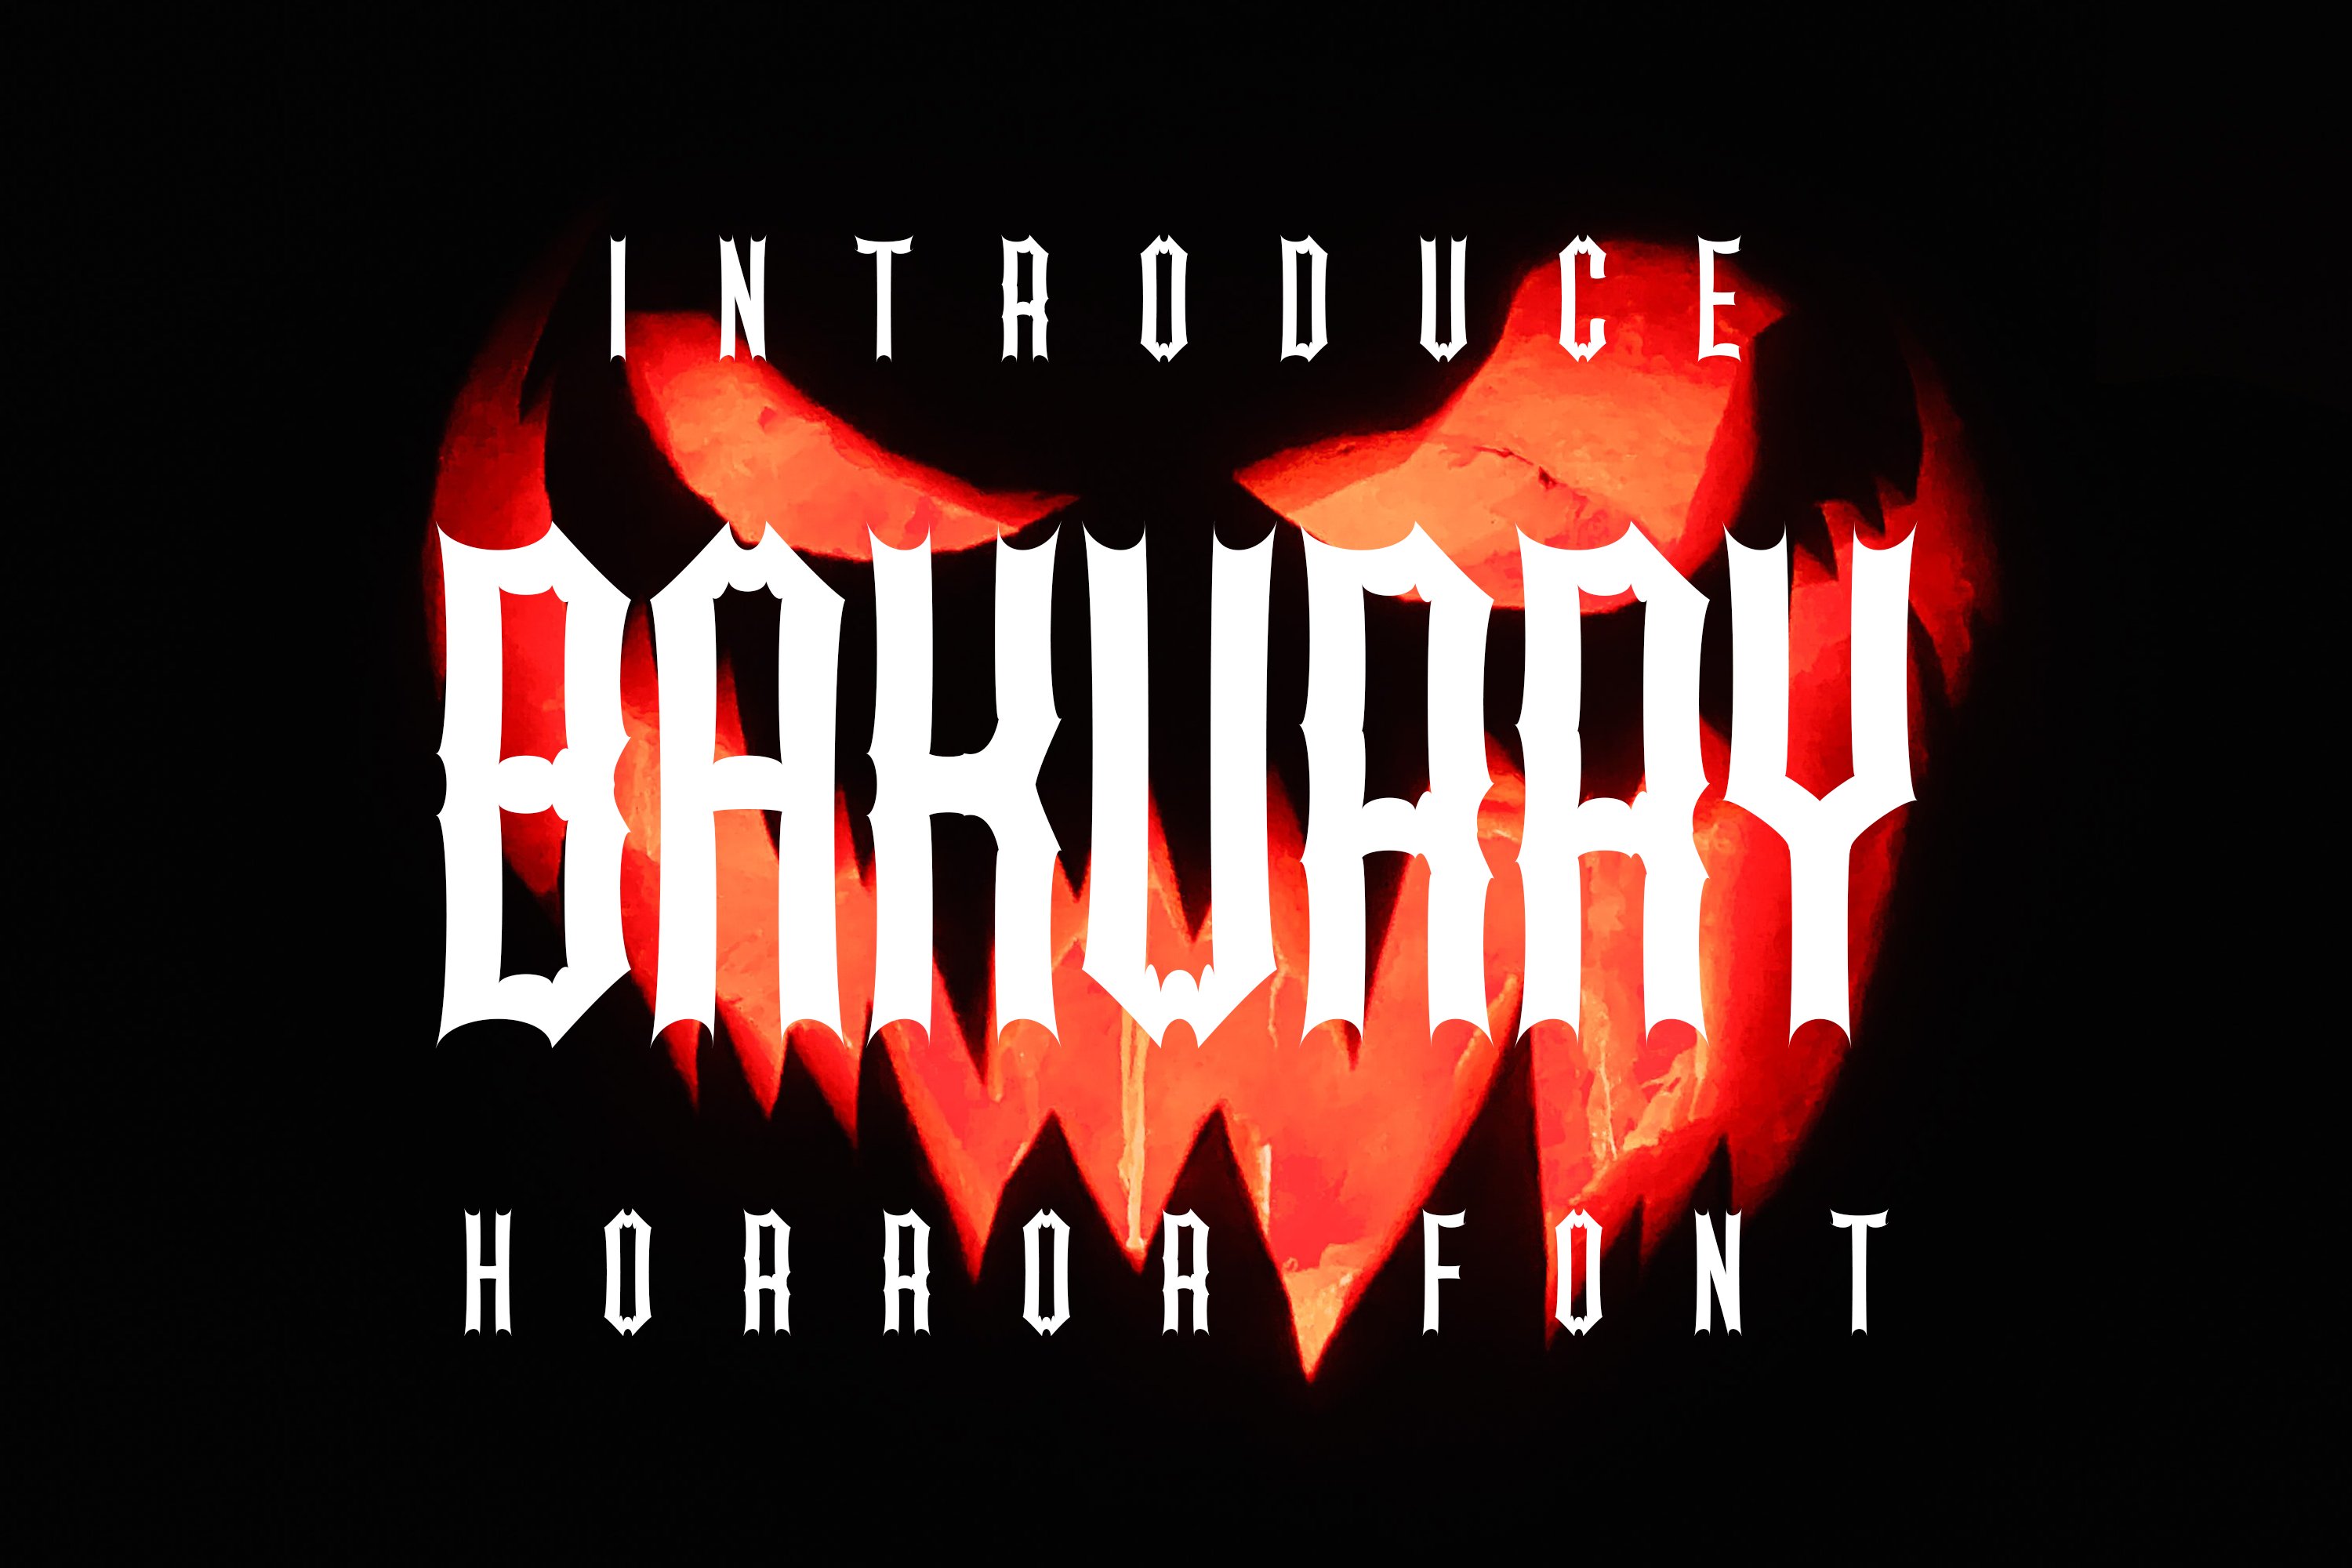 Bakurry cover image.